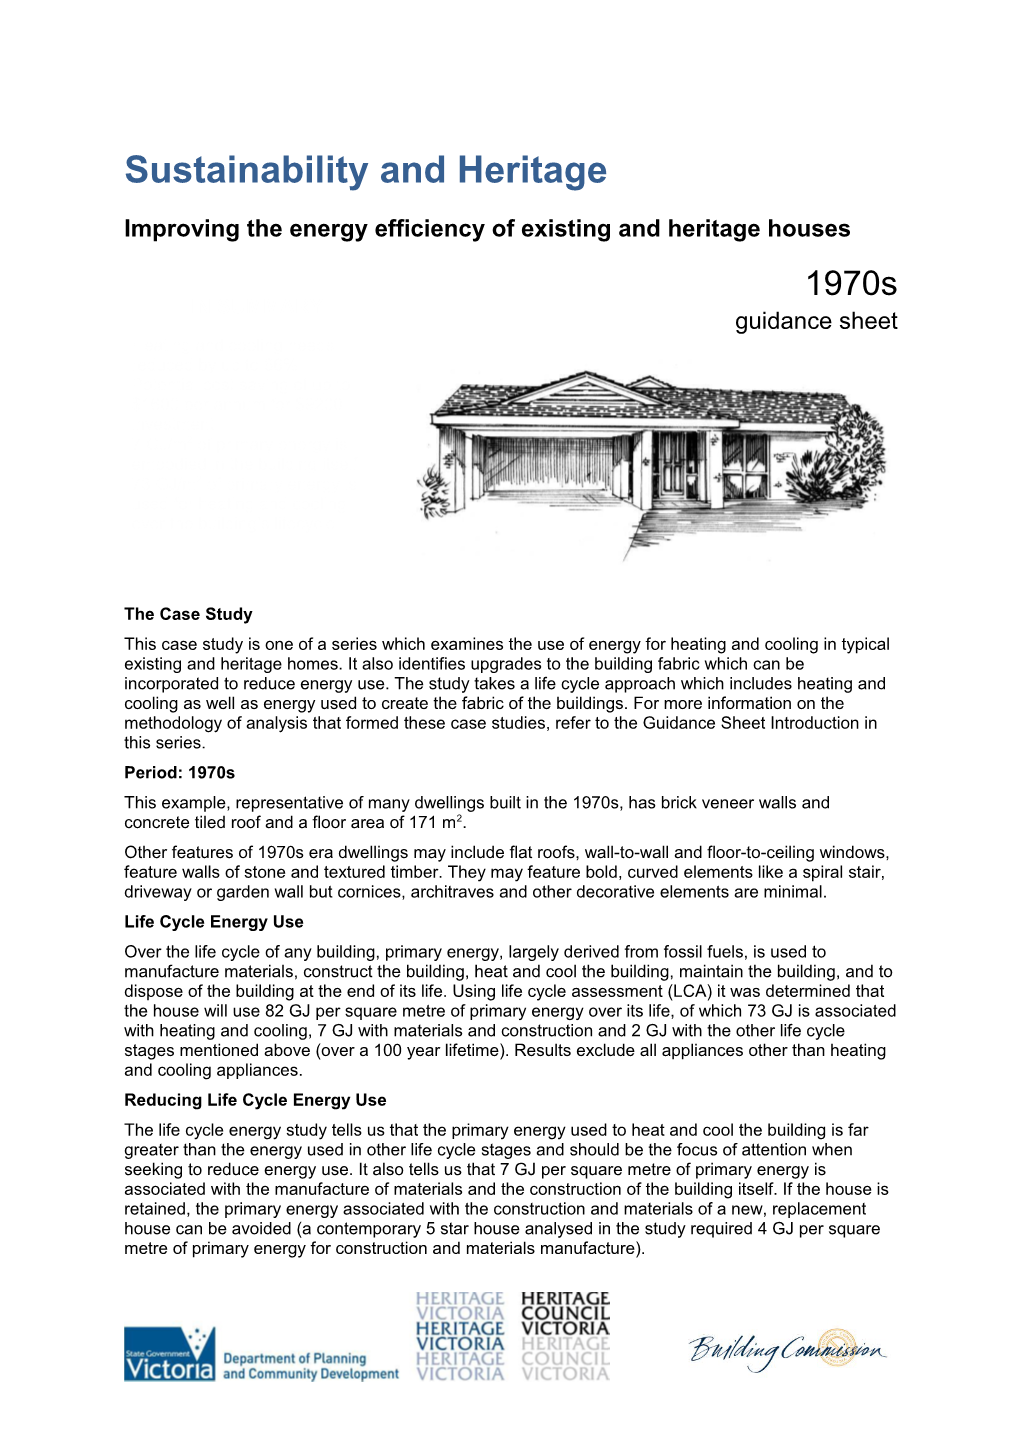 Improving the Energy Efficiency of Existing and Heritage Houses